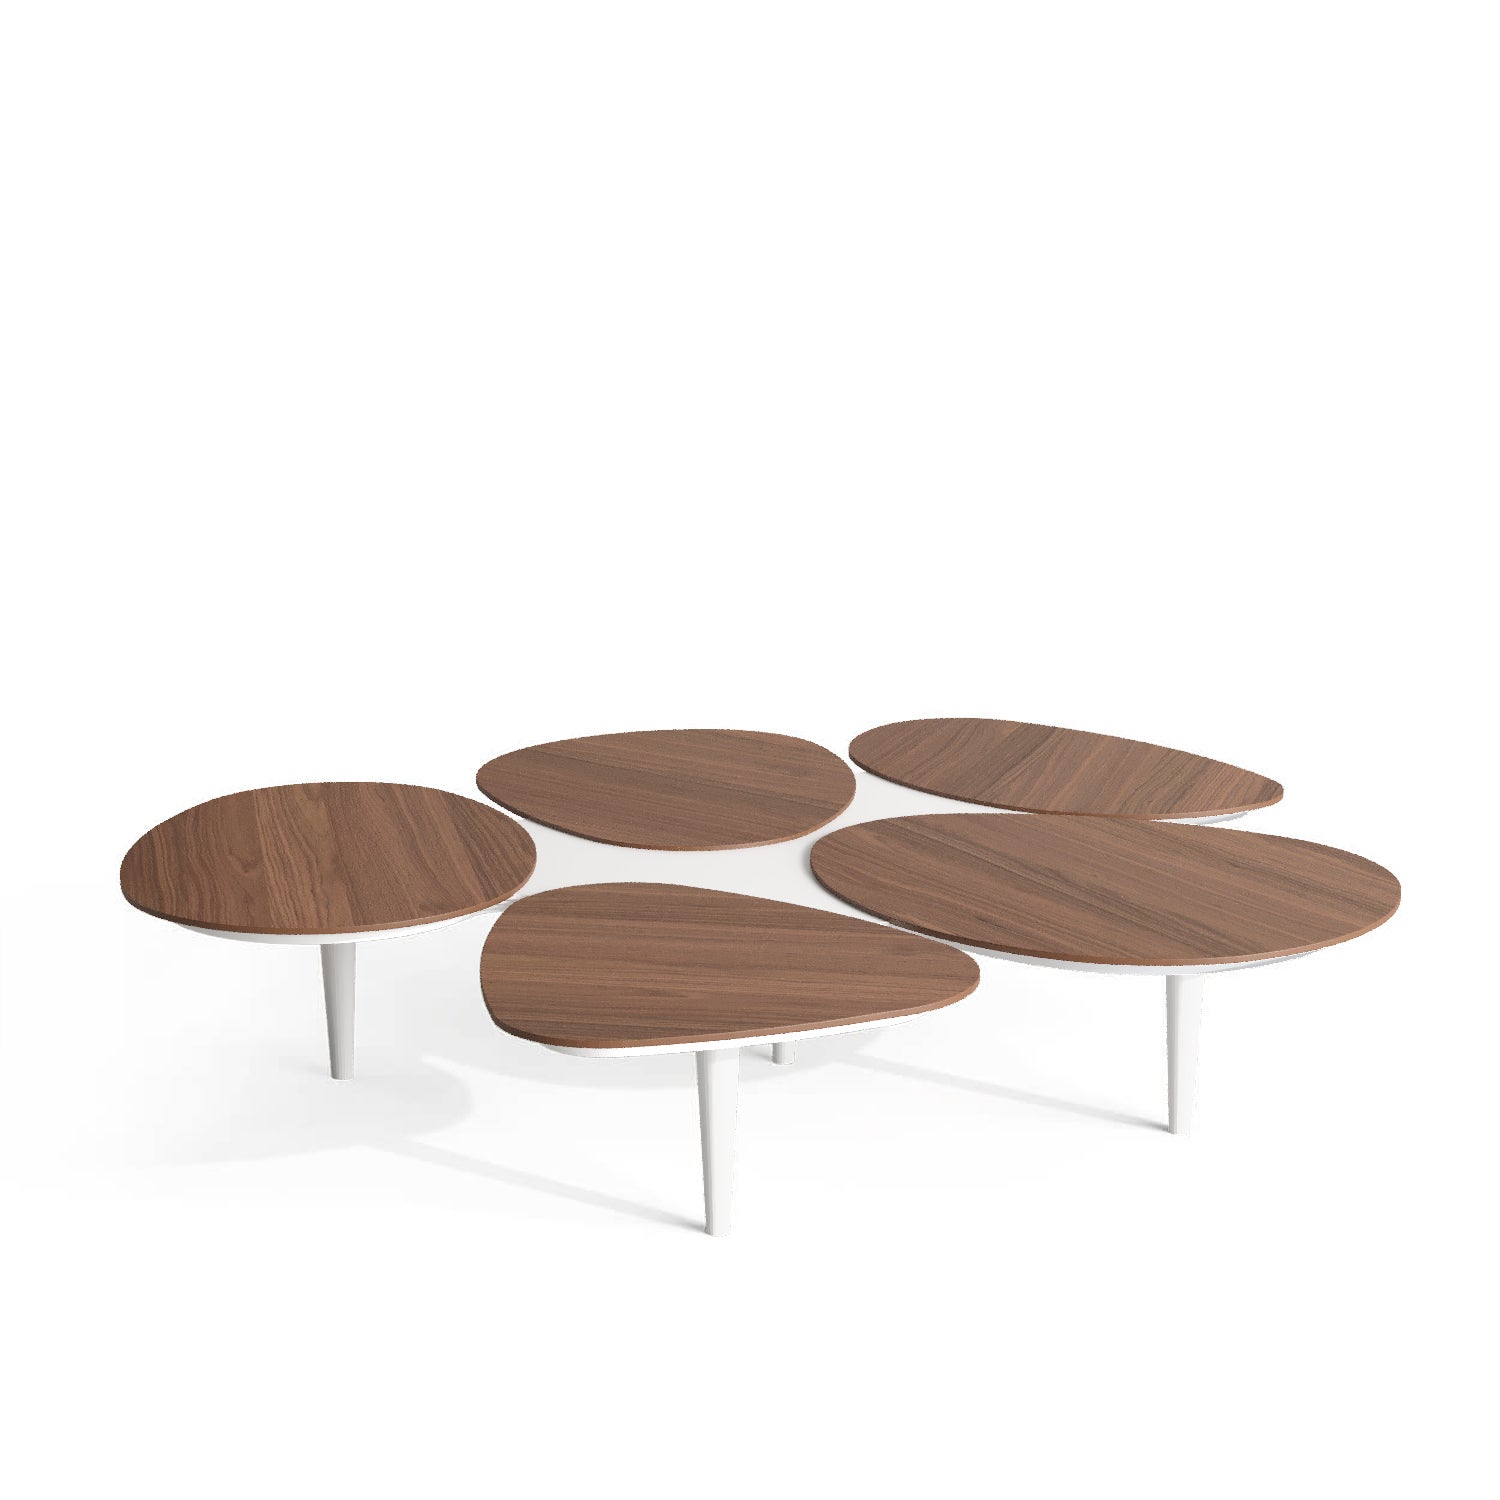 21st Century Modern Organic Center Coffee Table in Walnut Wood and White Lacquer